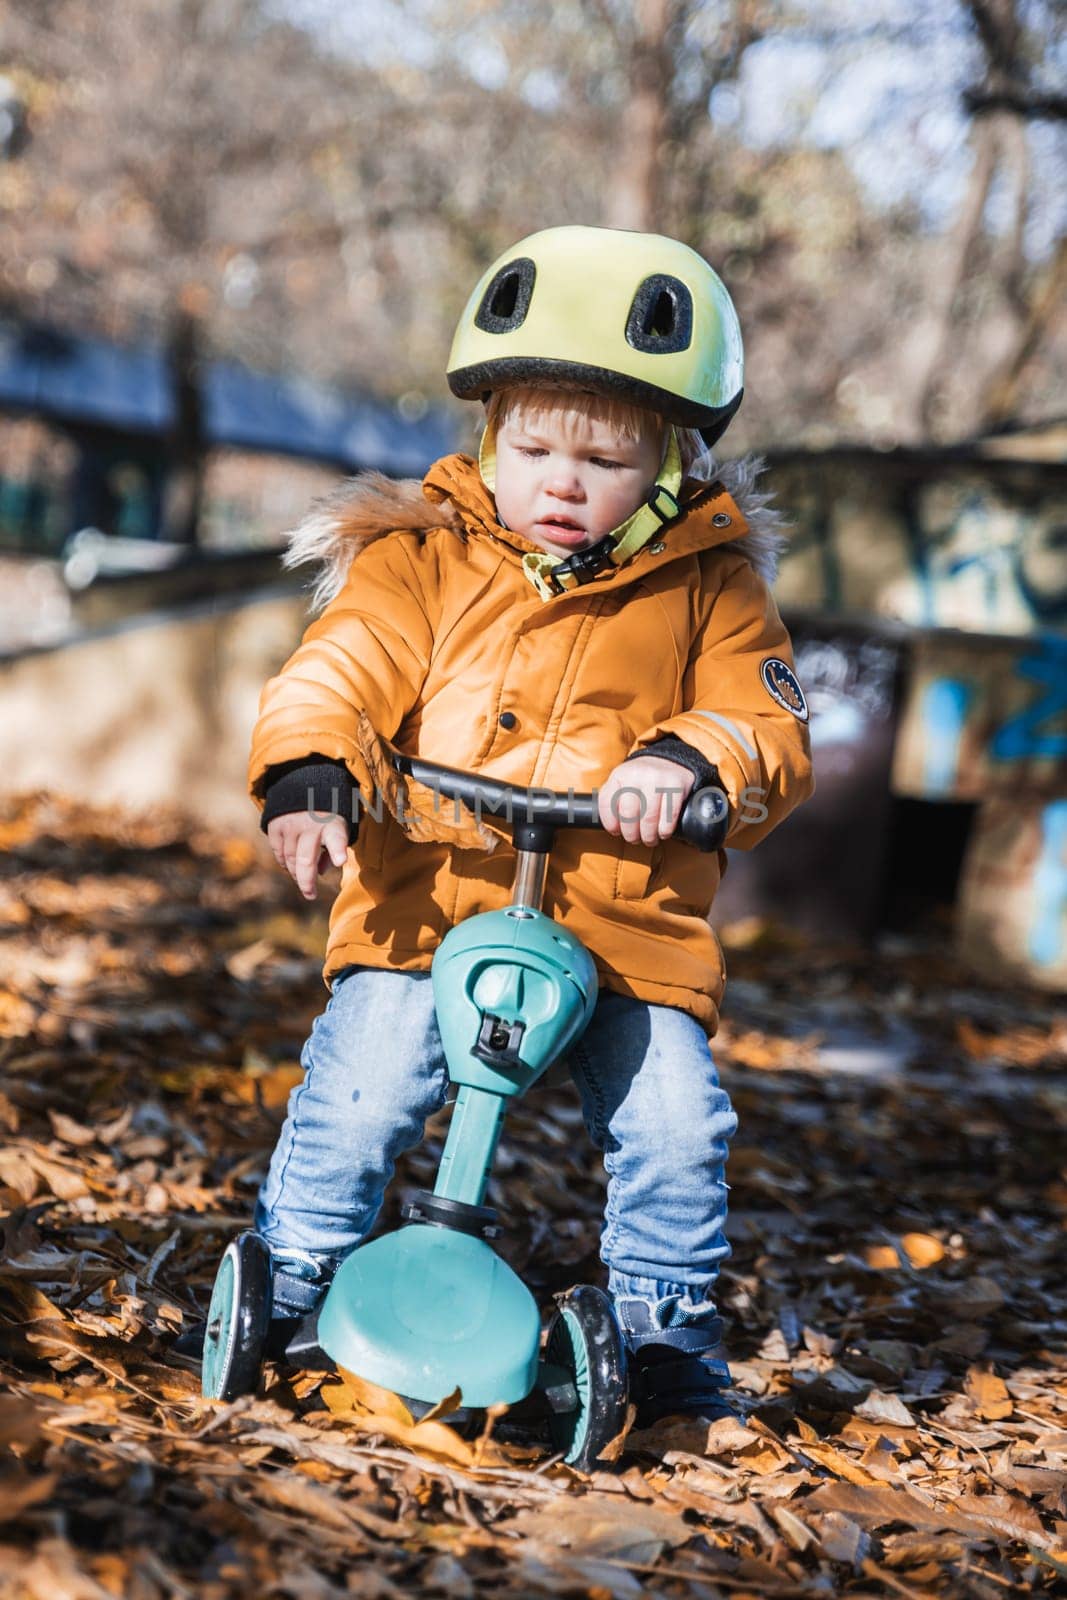 Adorable toddler boy wearing yellow protective helmet riding baby scooter outdoors on autumn day. Kid training balance on mini bike in city park. Fun autumn outdoor activity for small kids